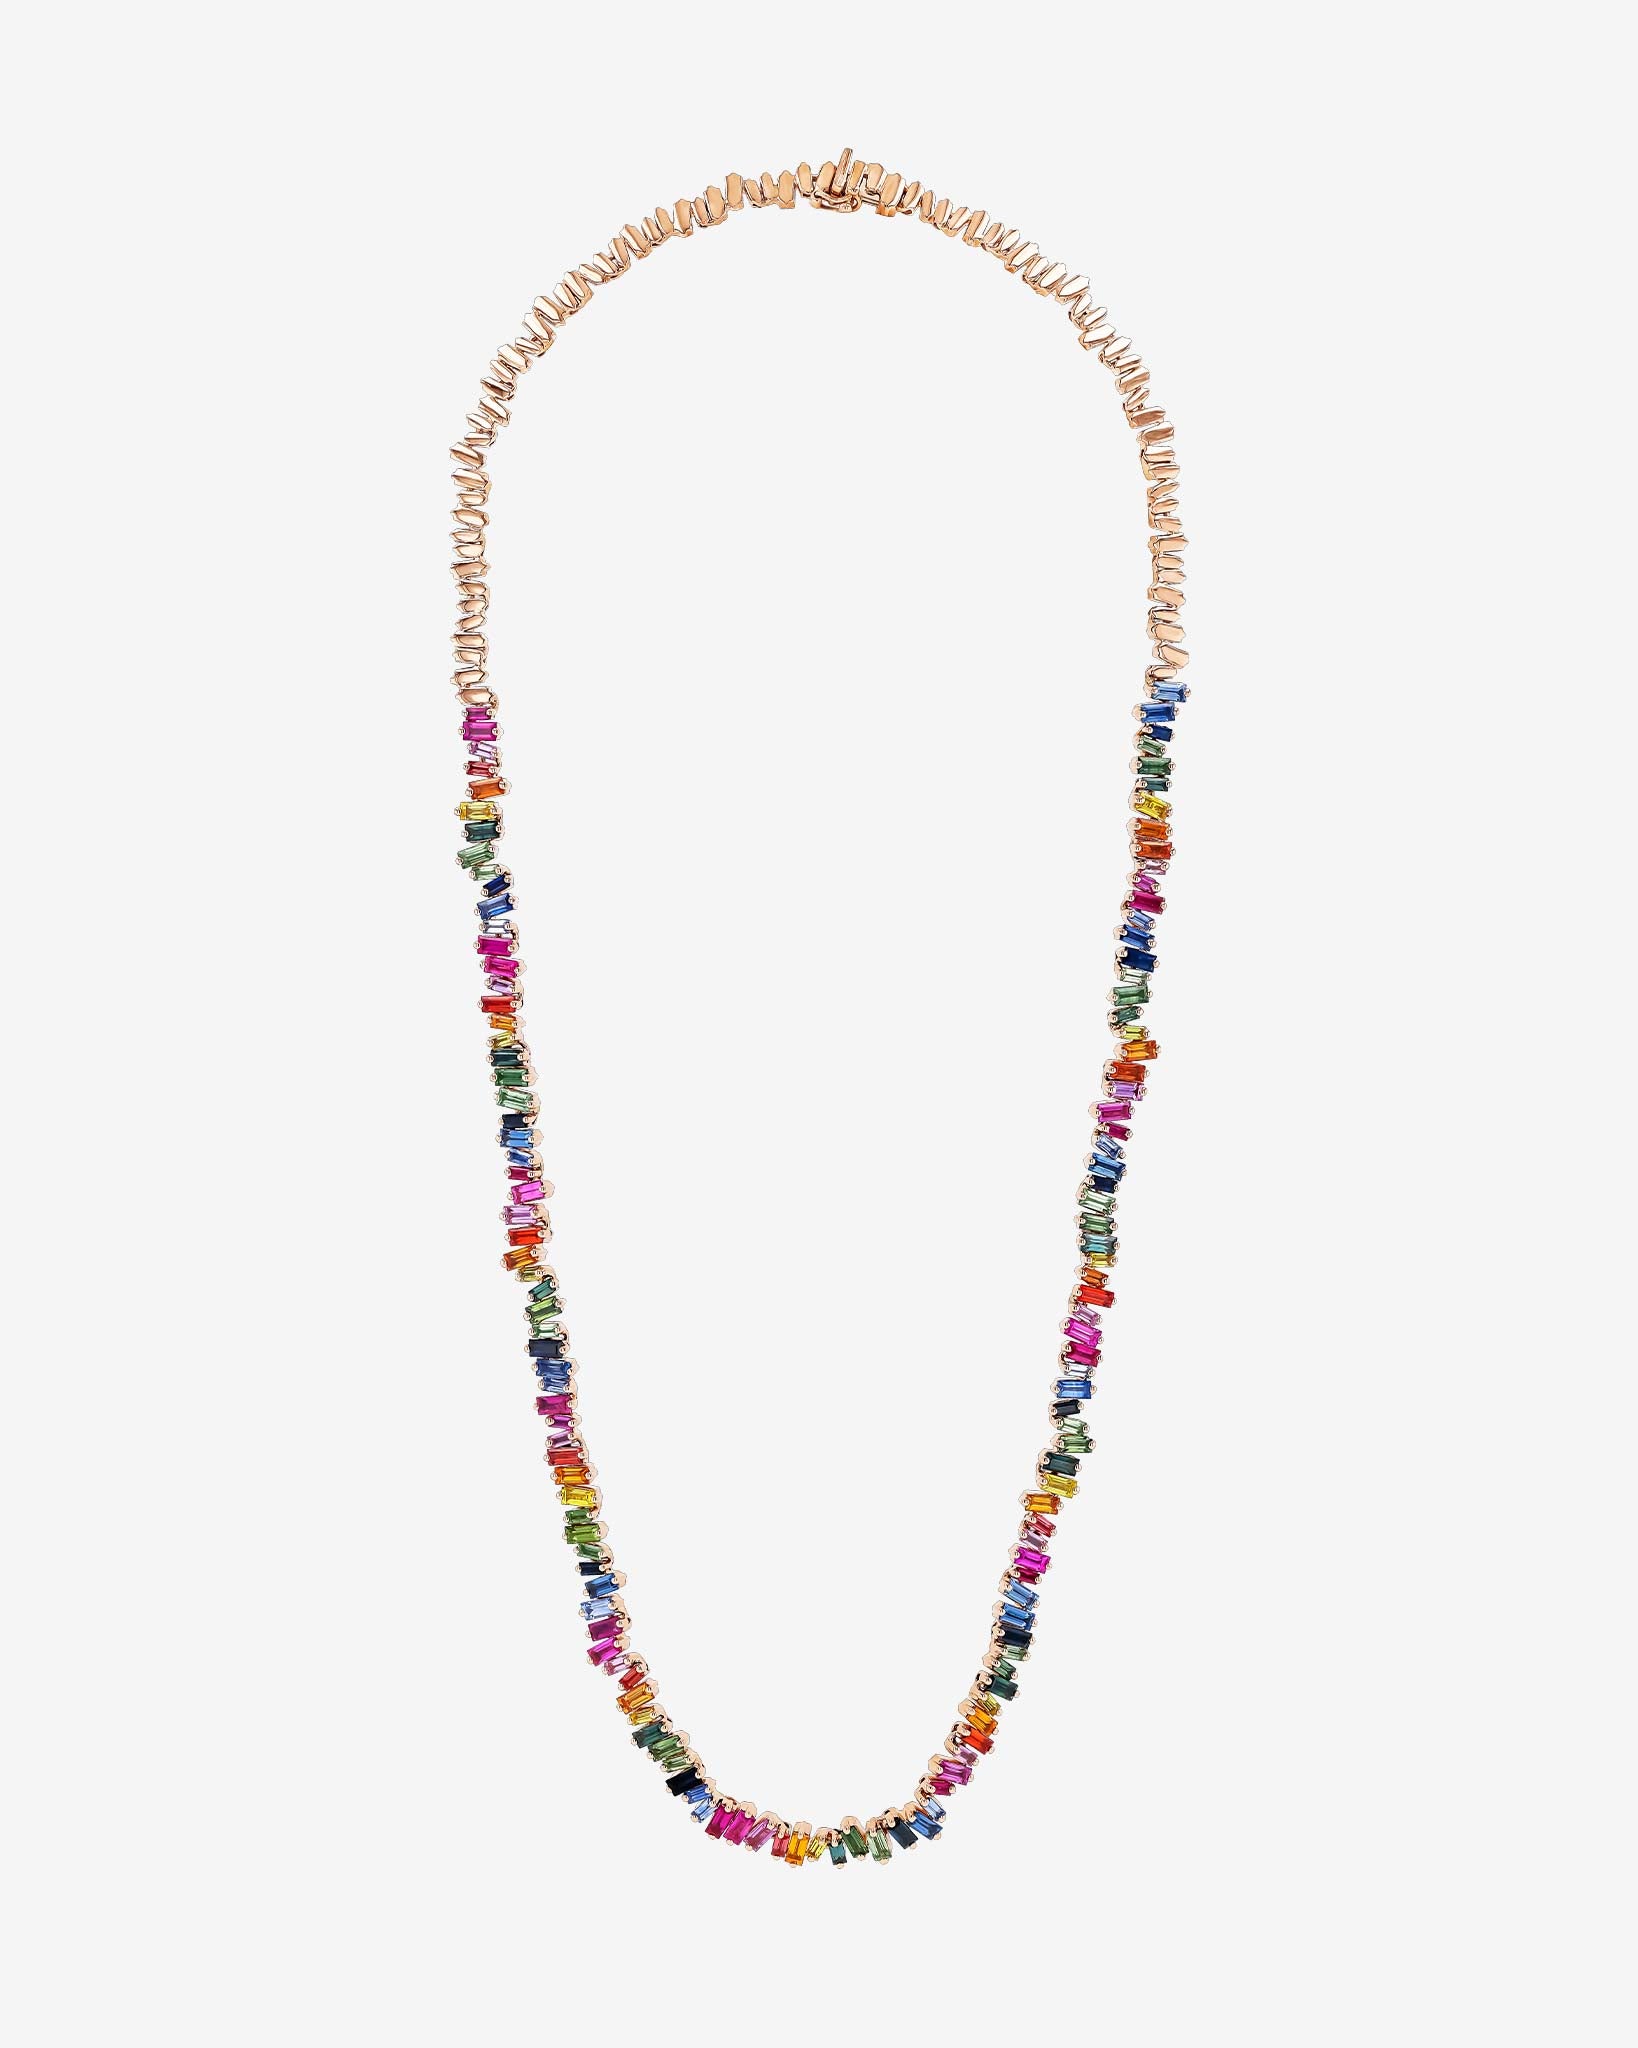 Suzanne Kalan Bold Rainbow Sapphire Tennis Necklace in 18k rose gold